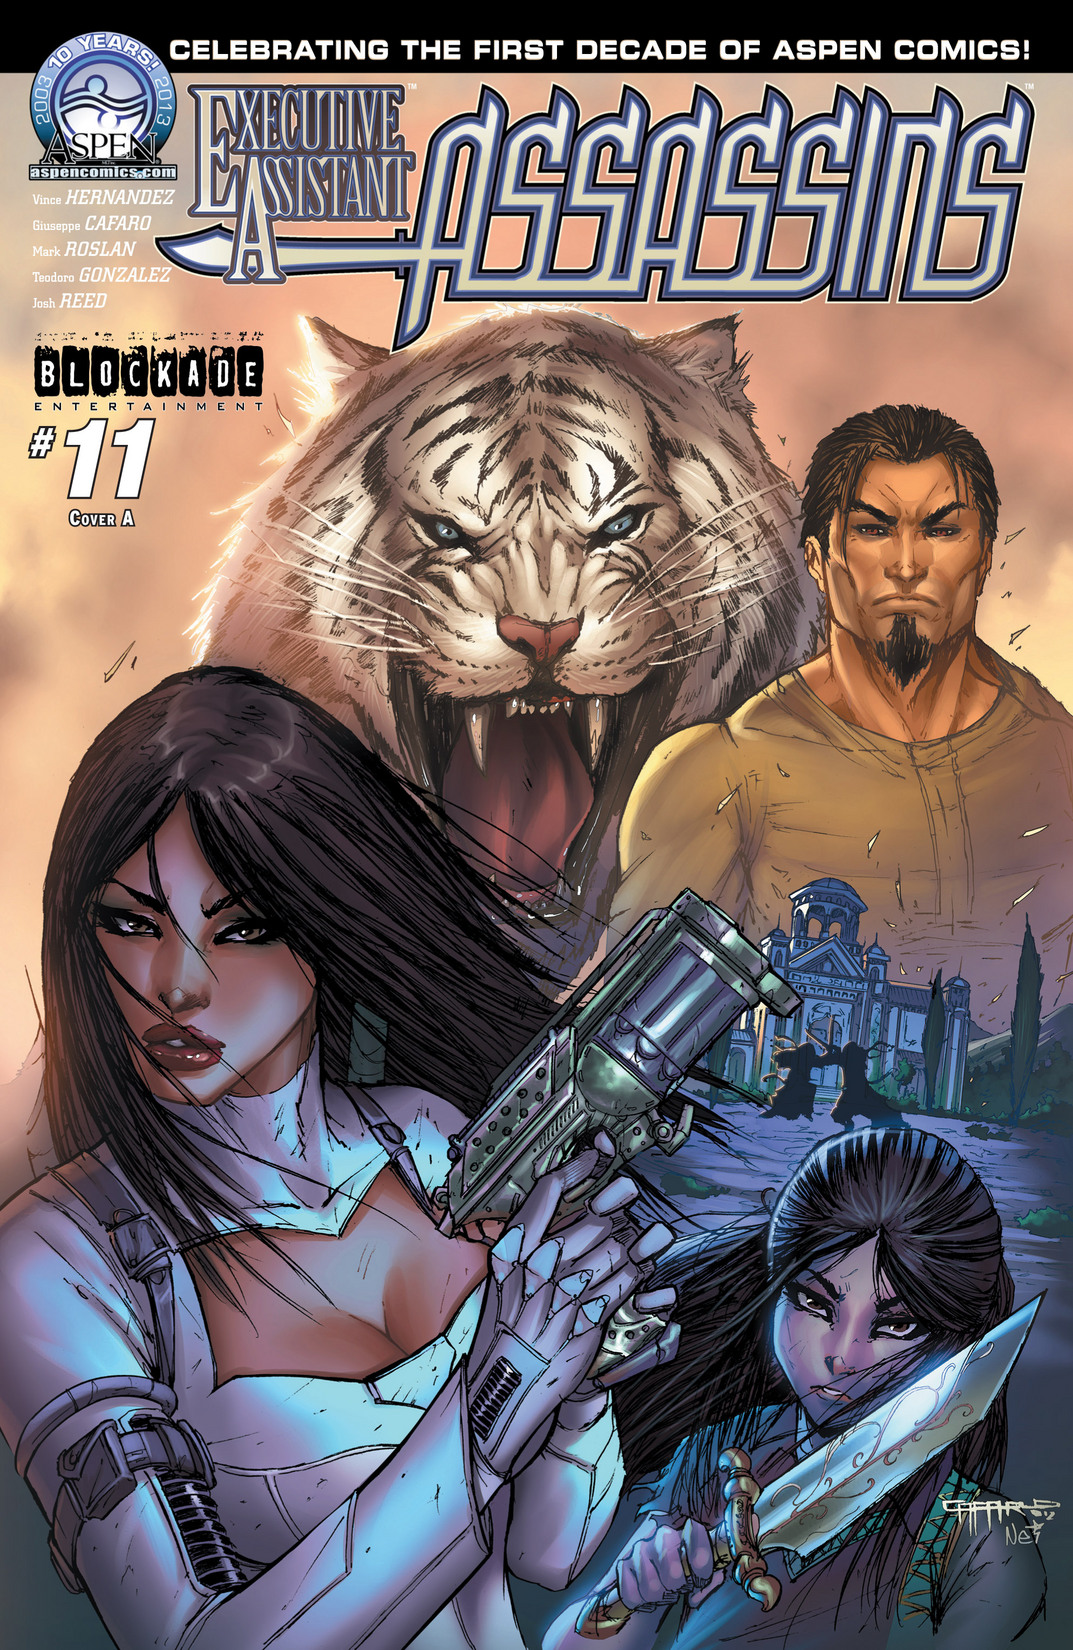 Read online Executive Assistant: Assassins comic -  Issue #11 - 1